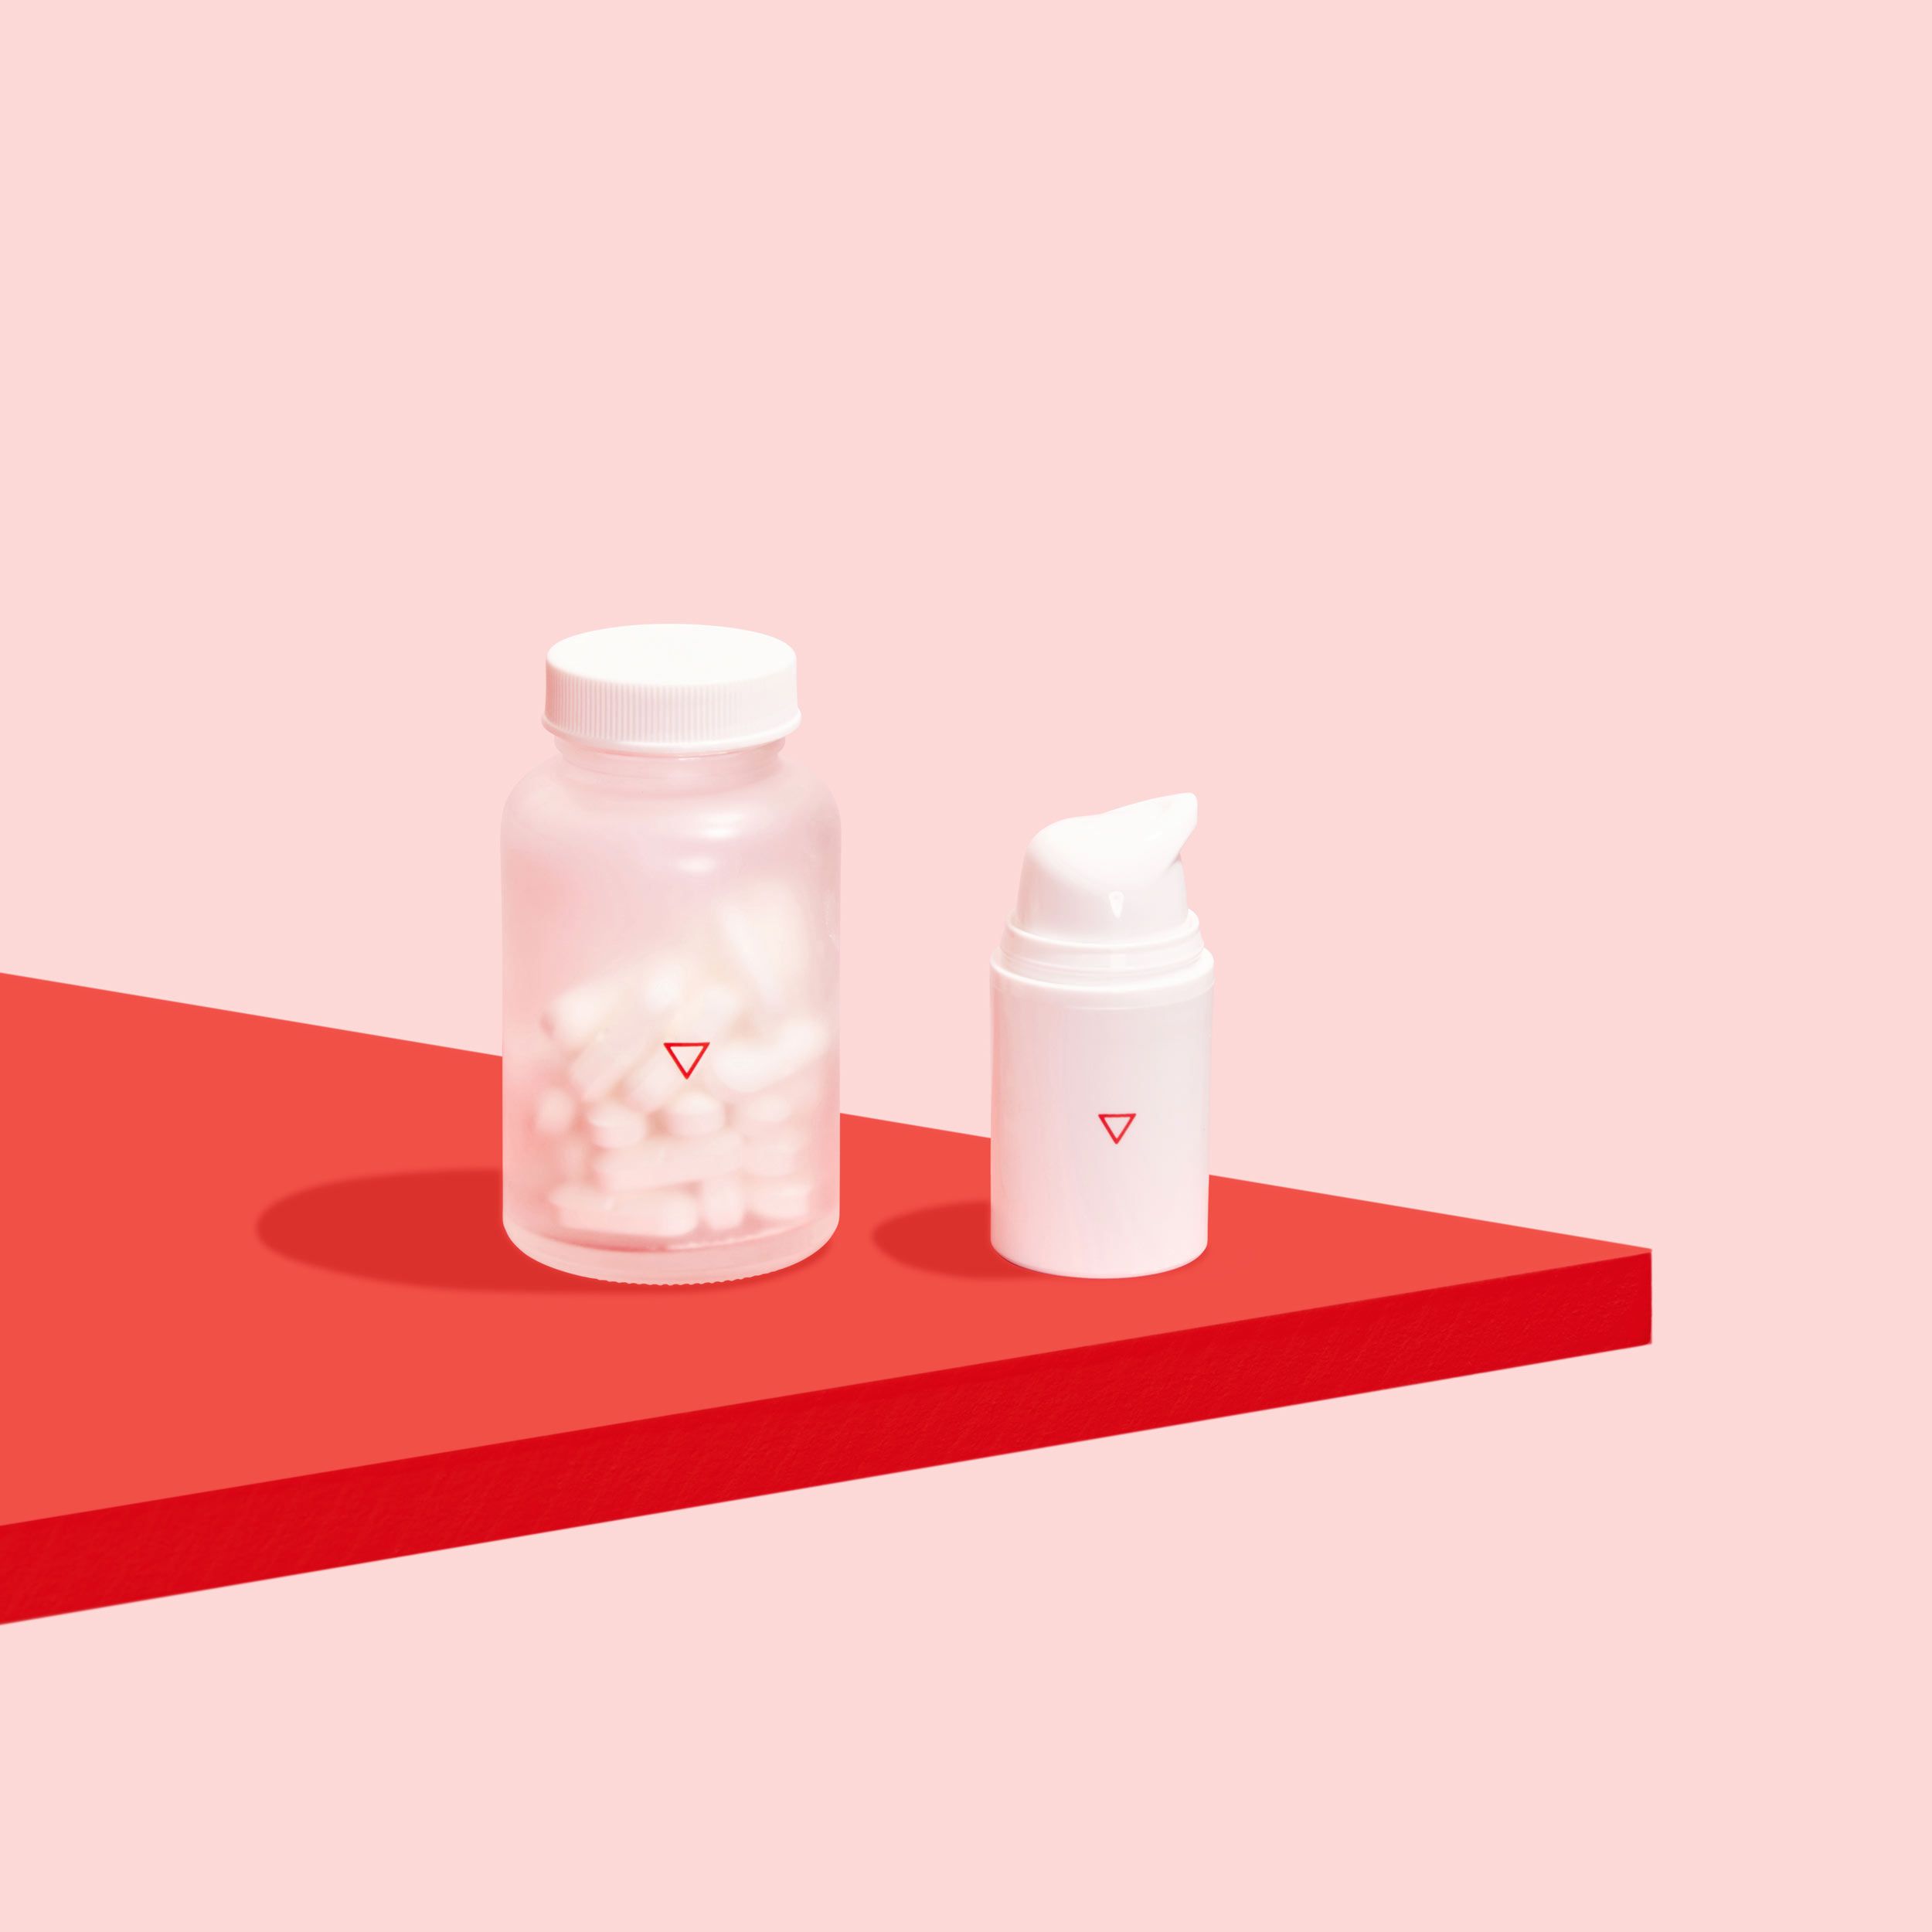 Jar of oral acyclovir pills and bottle of topical acyclovir cream to treat herpes outbreaks on red surface, on pink background